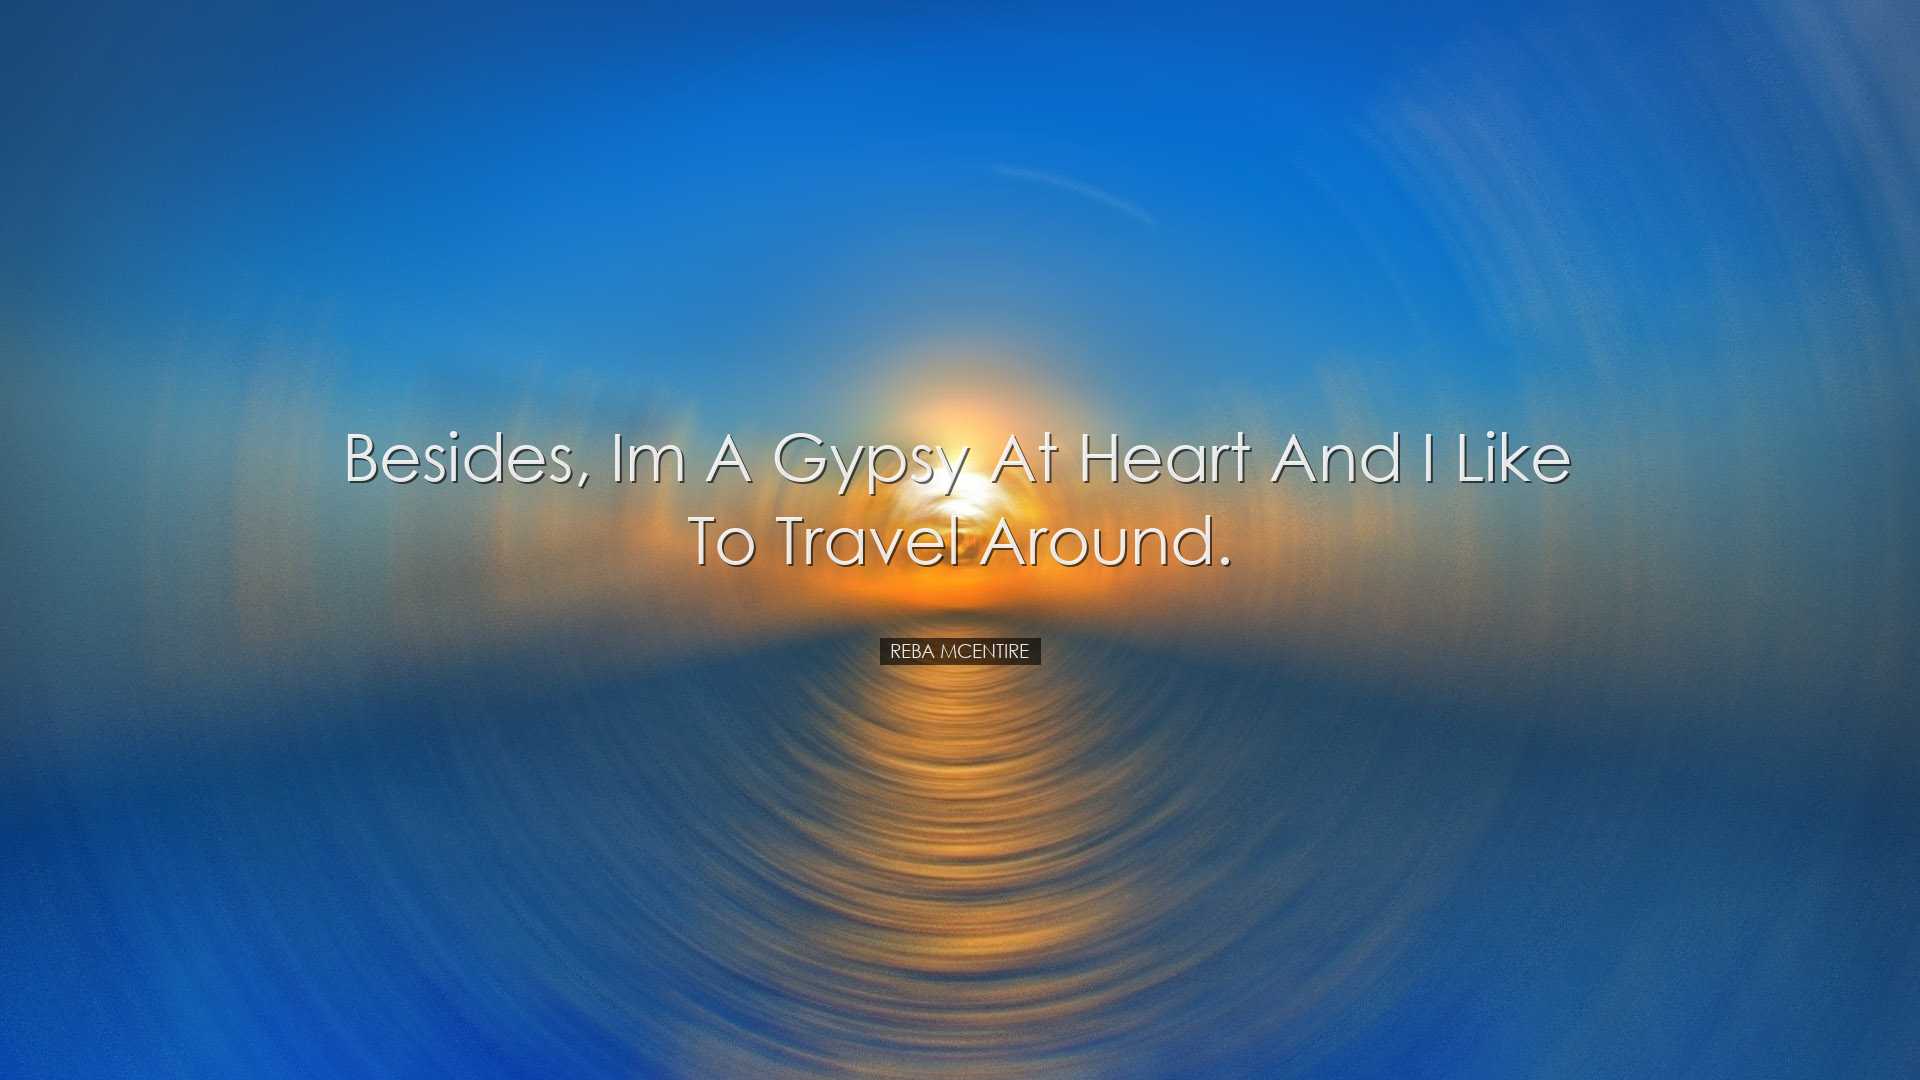 Besides, Im a gypsy at heart and I like to travel around. - Reba M